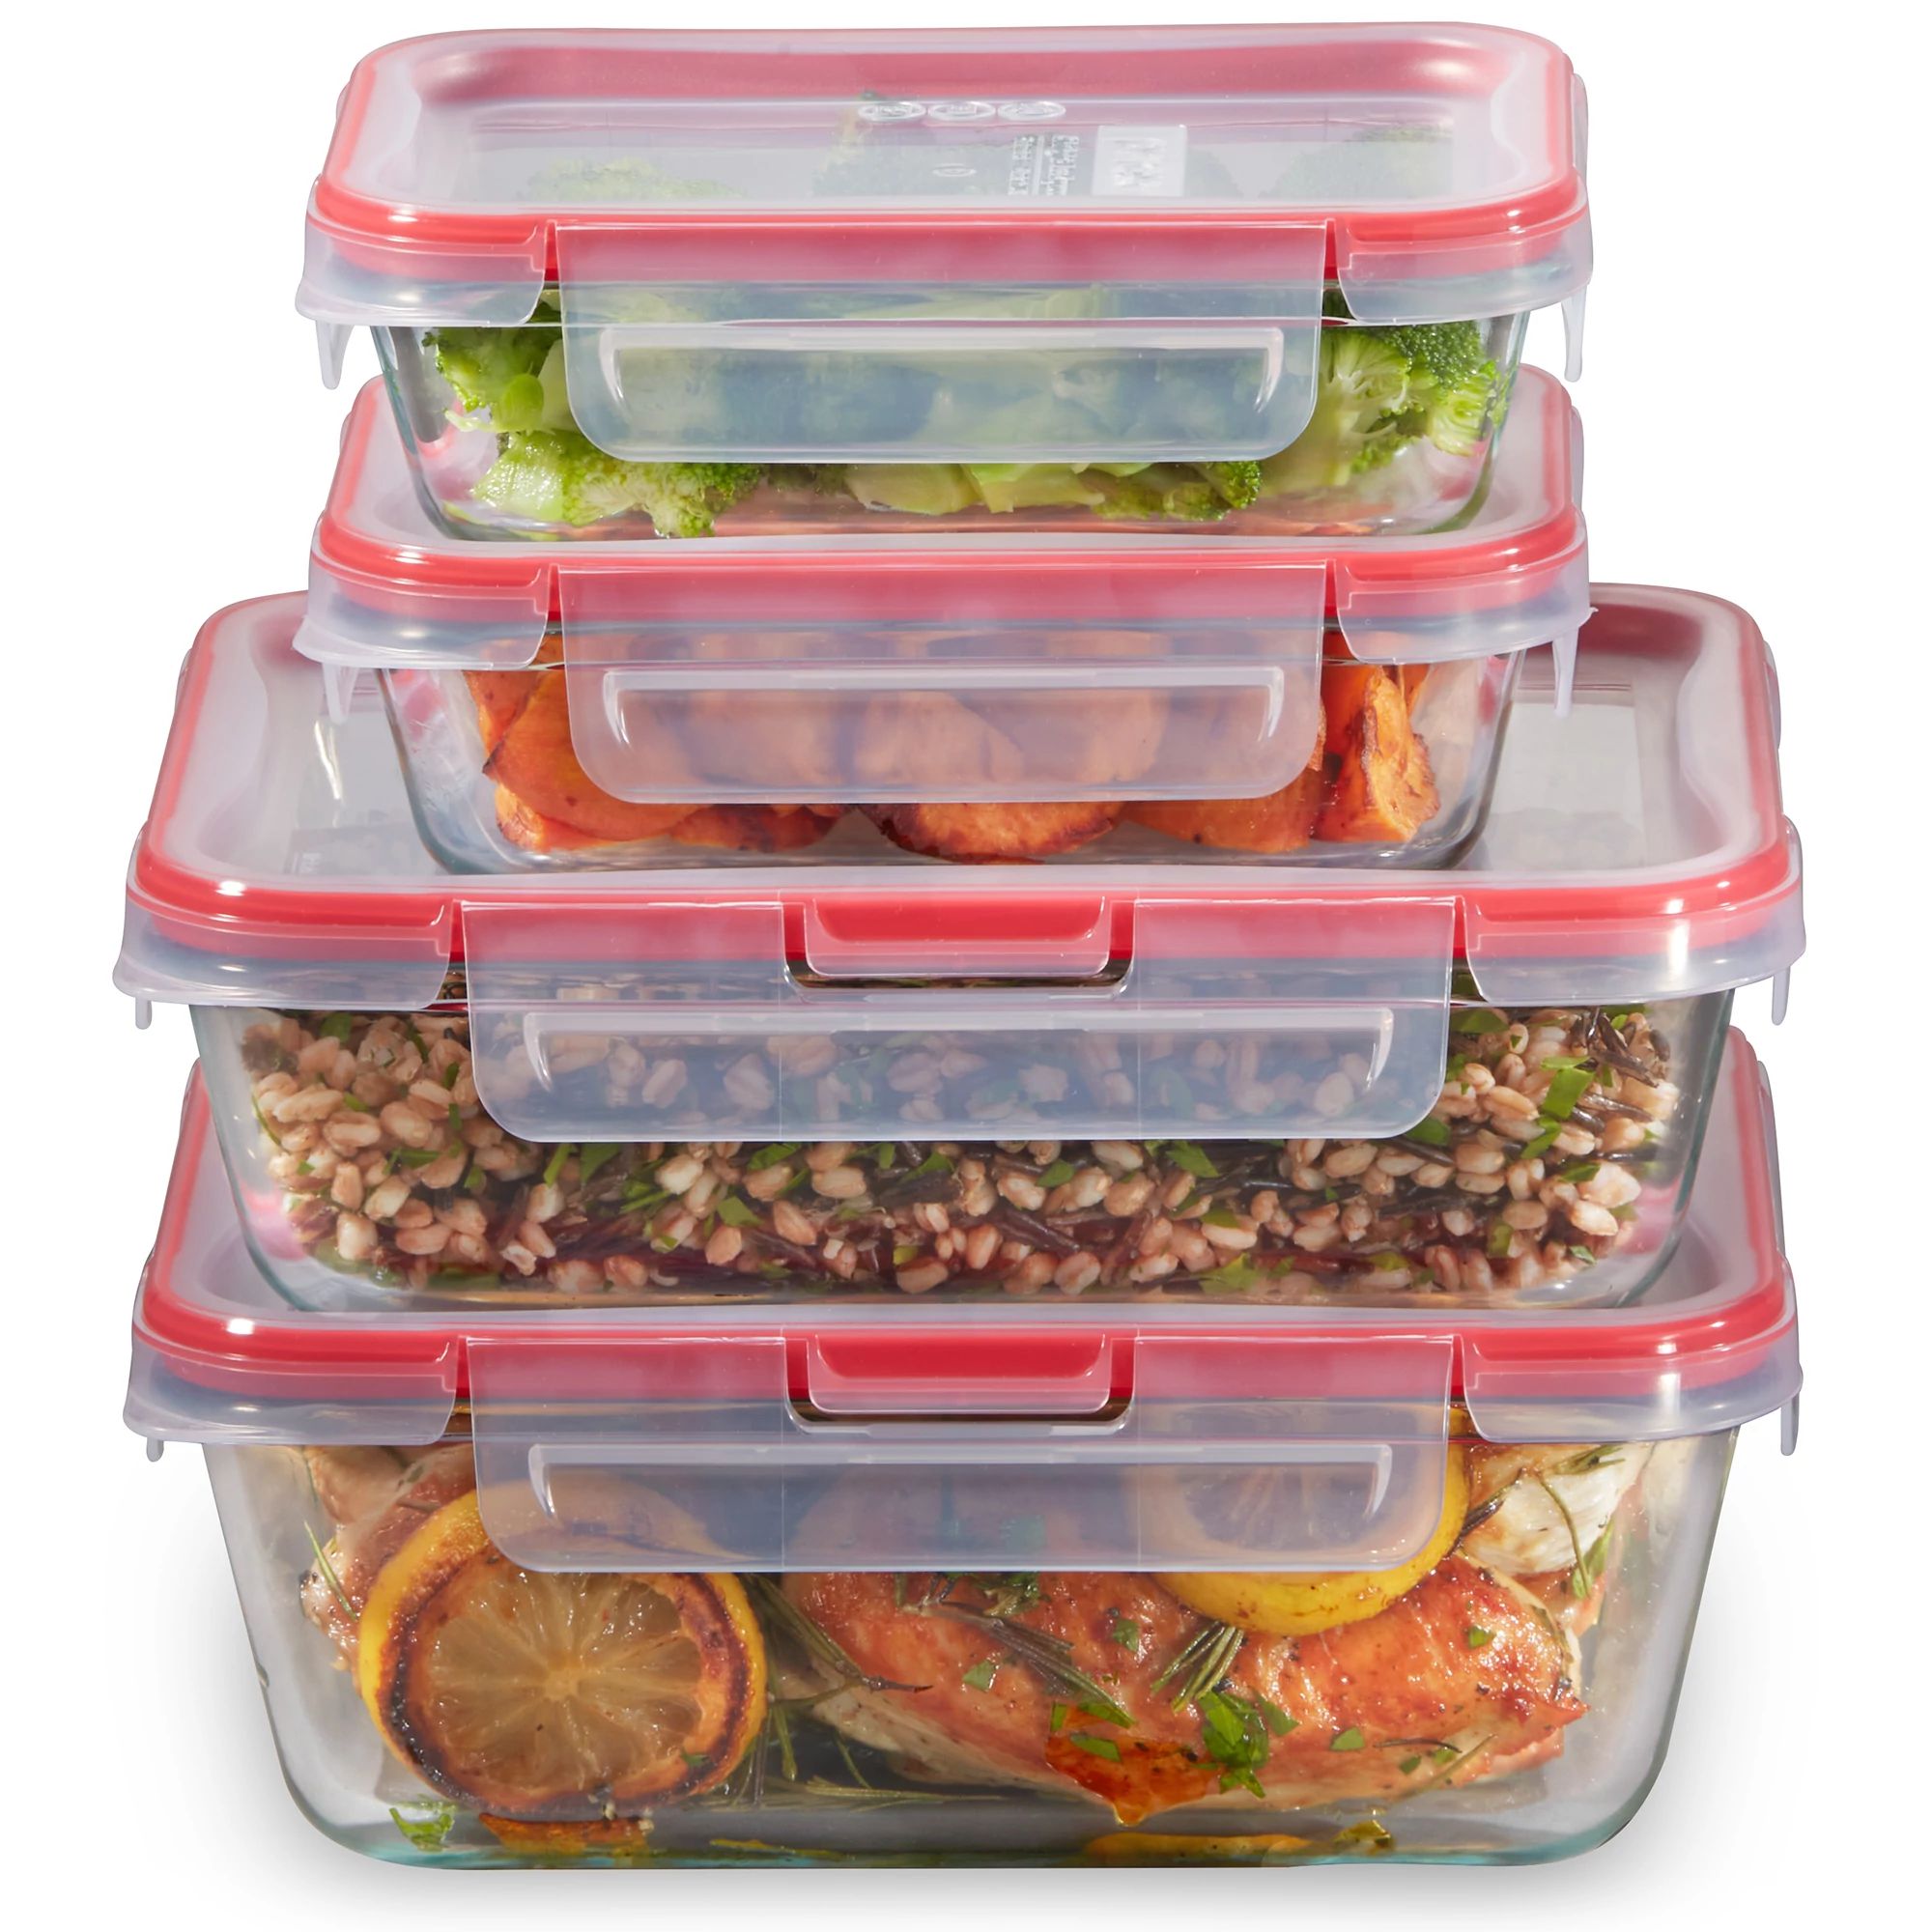 Snapware Total Solution 6-Pc Plastic Food Storage Containers Set with Lids,  8.5-Cup Rectangle Meal Prep Container, Non-Toxic, BPA-Free with 4 Locking